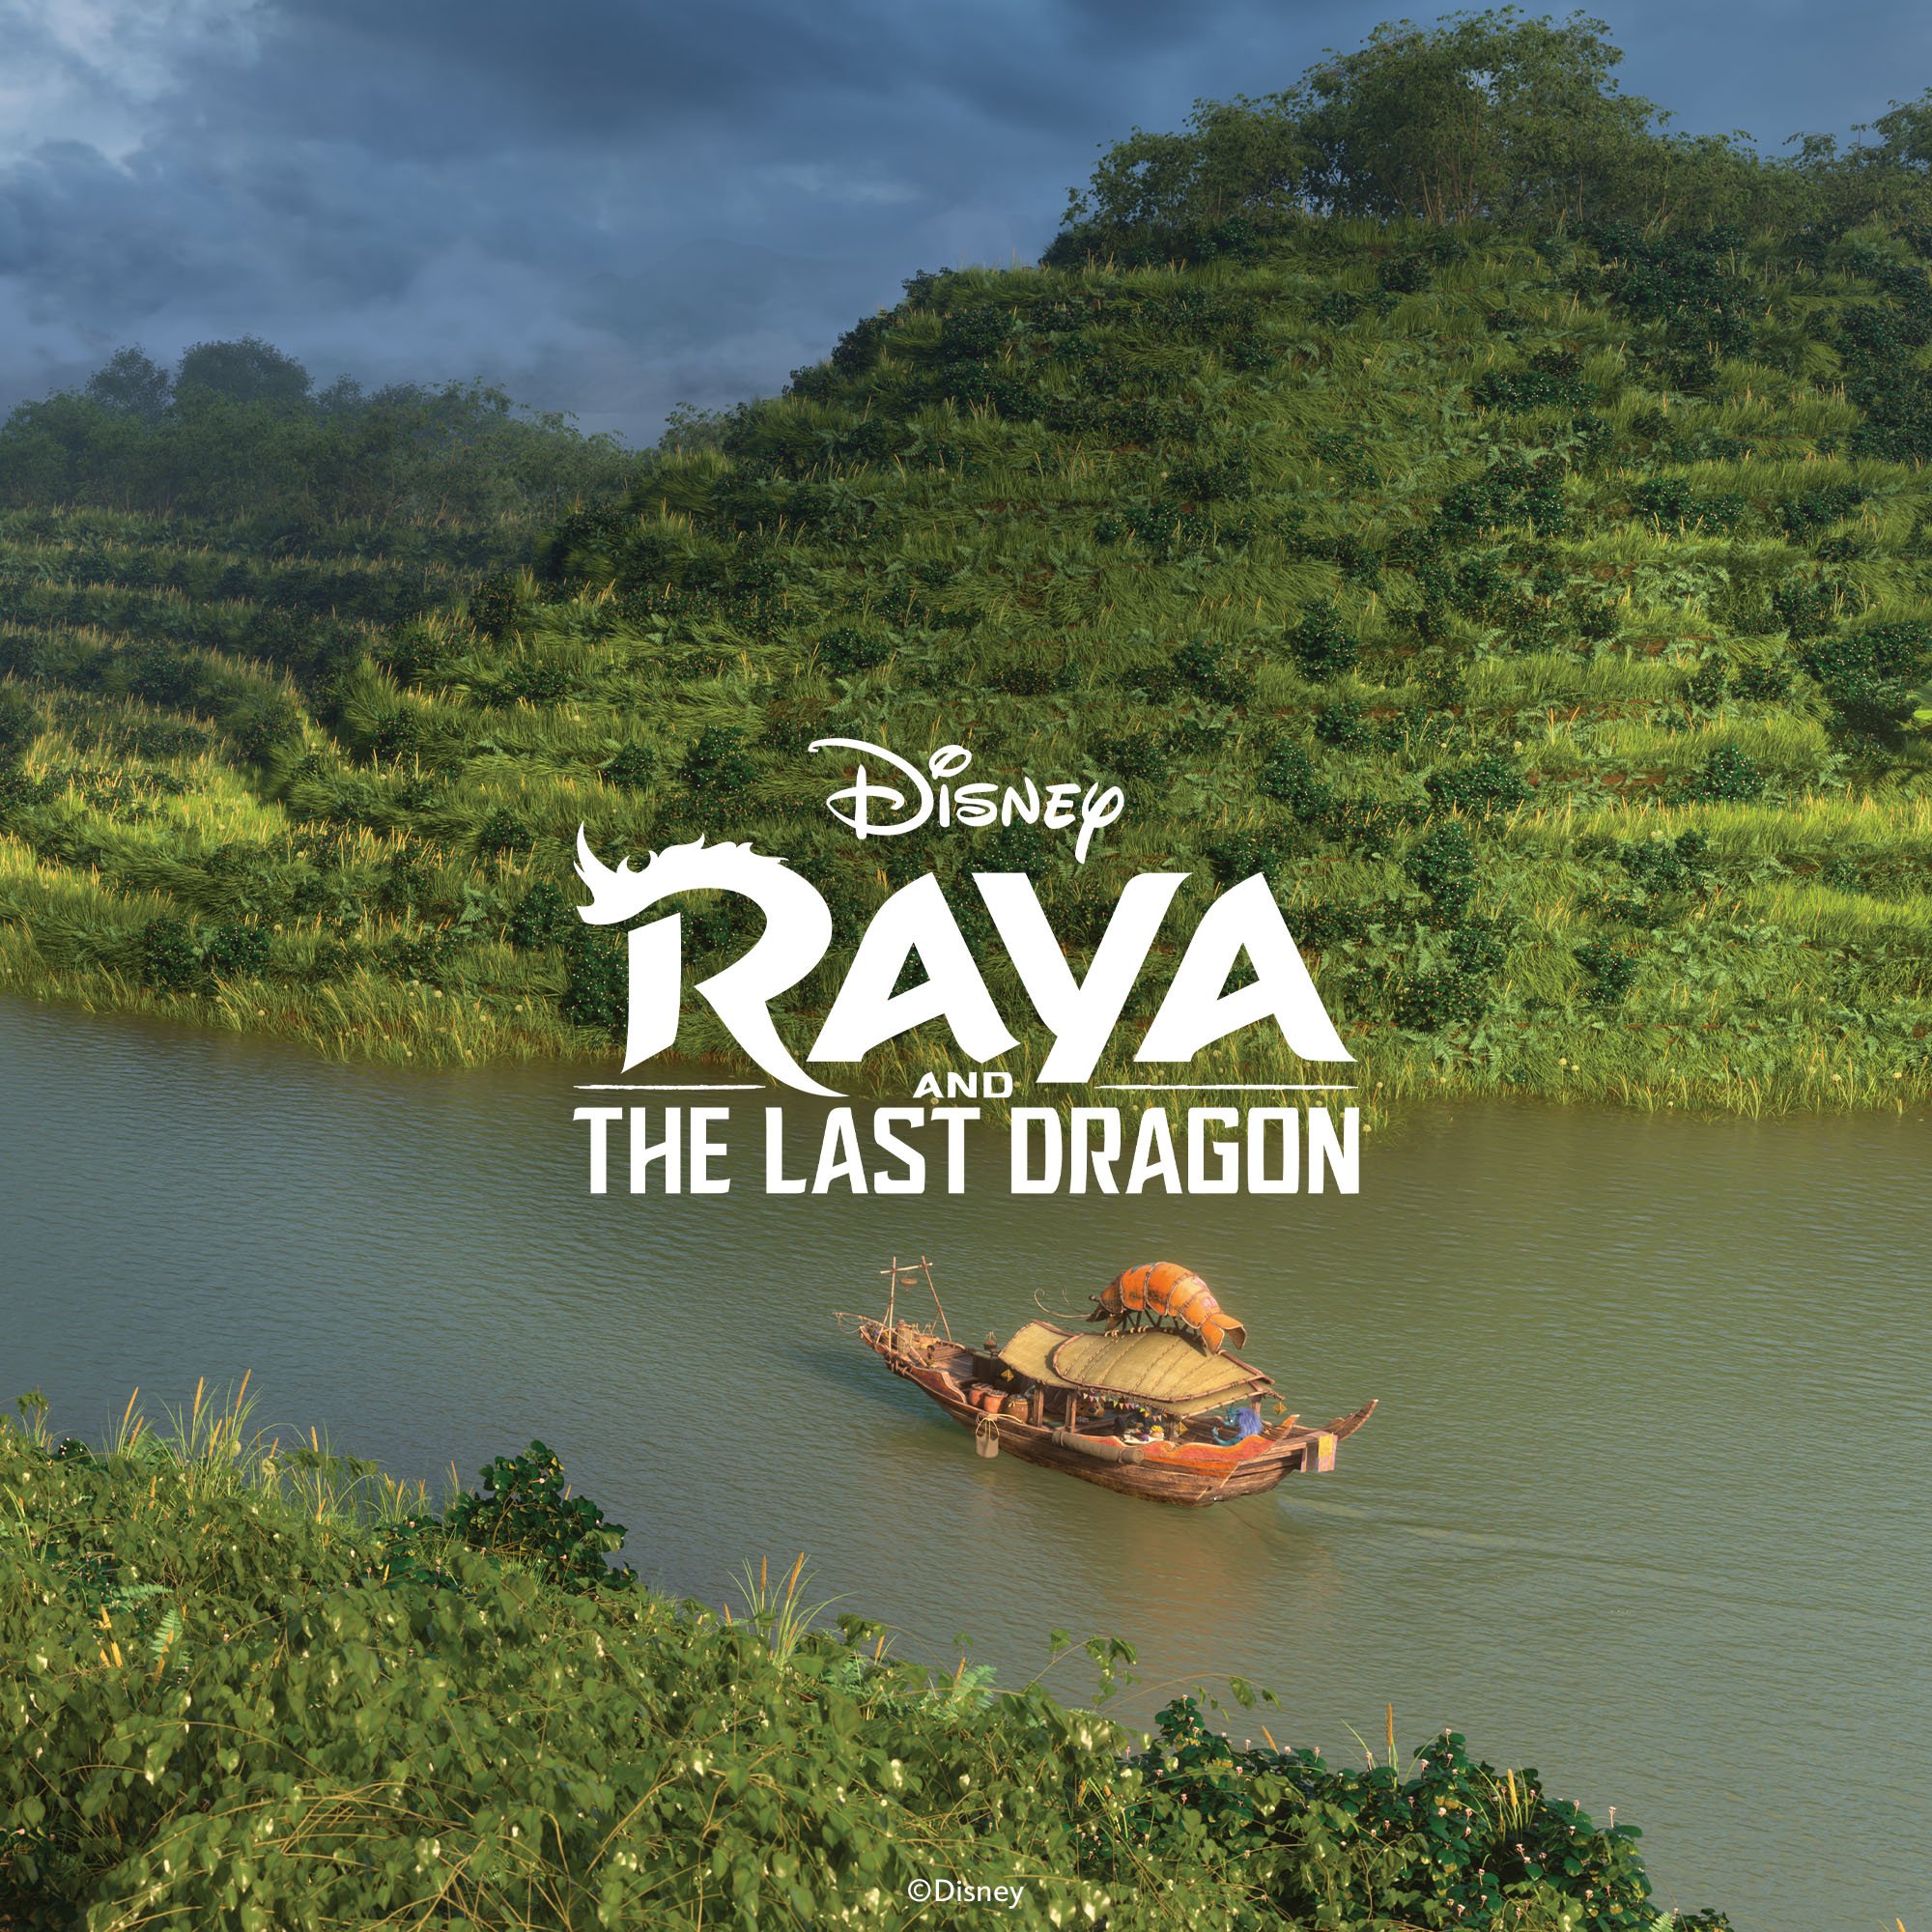 Raya's River Boat Ride 1x1 with title_V3.jpg